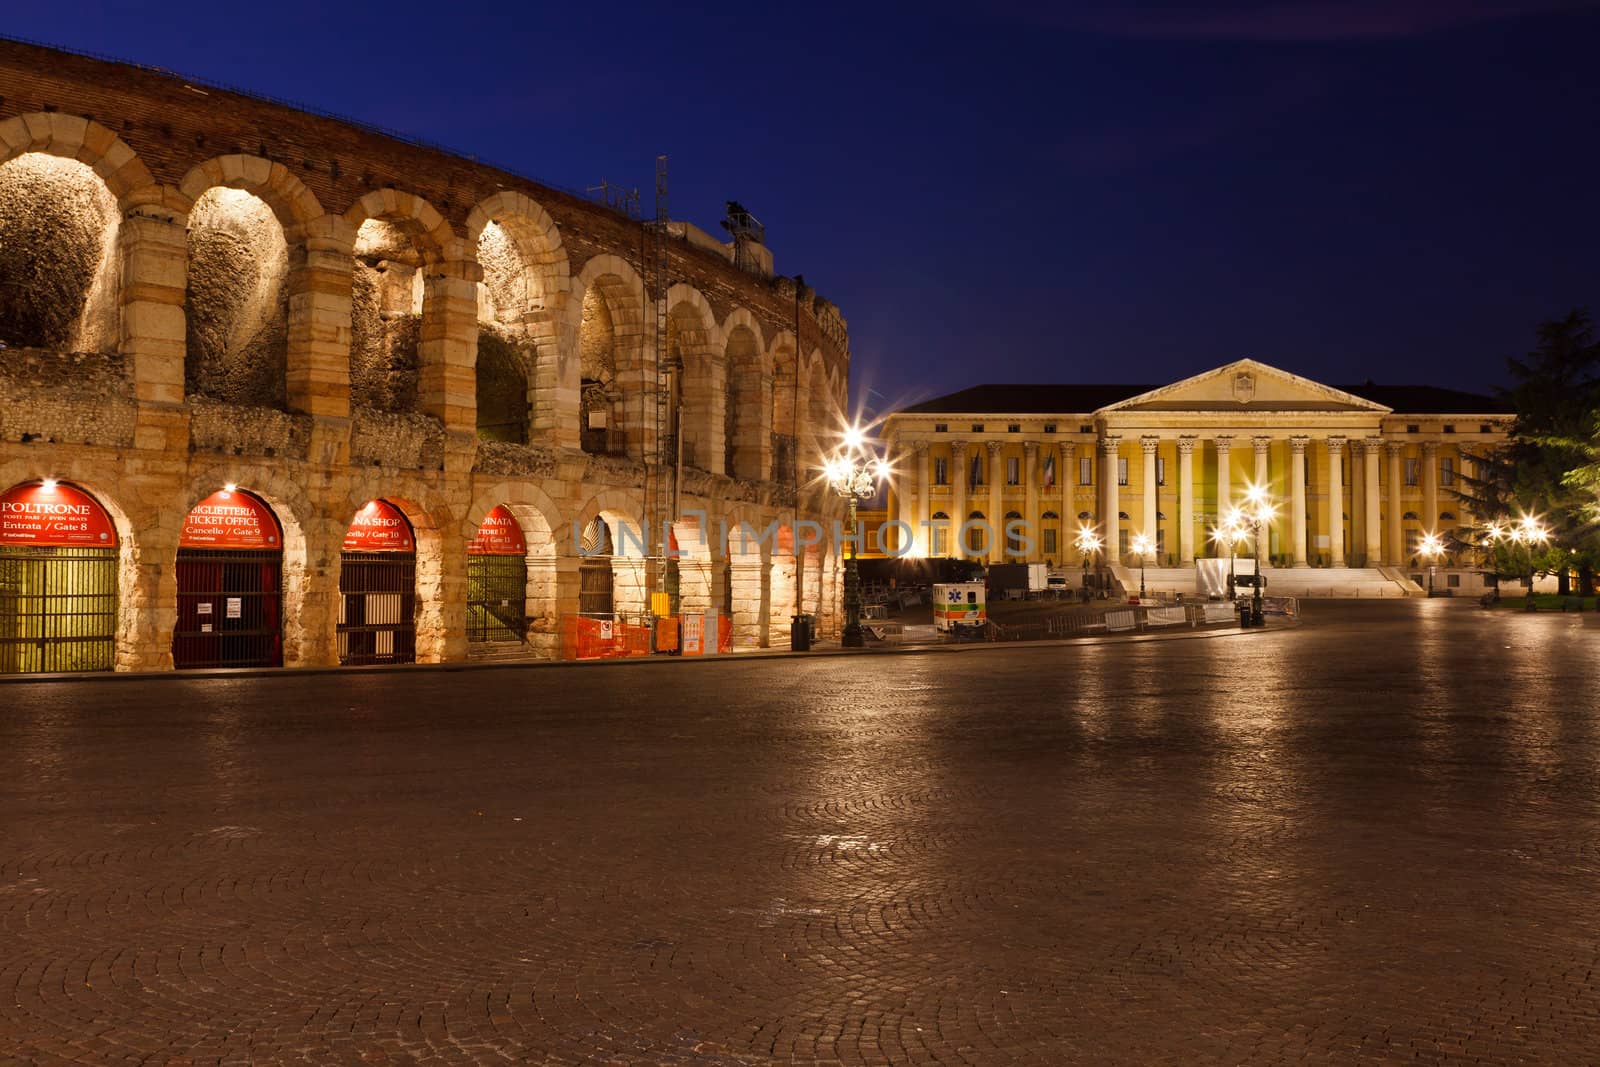 Piazza Bra and Ancient Amphitheater in Verona, Italy